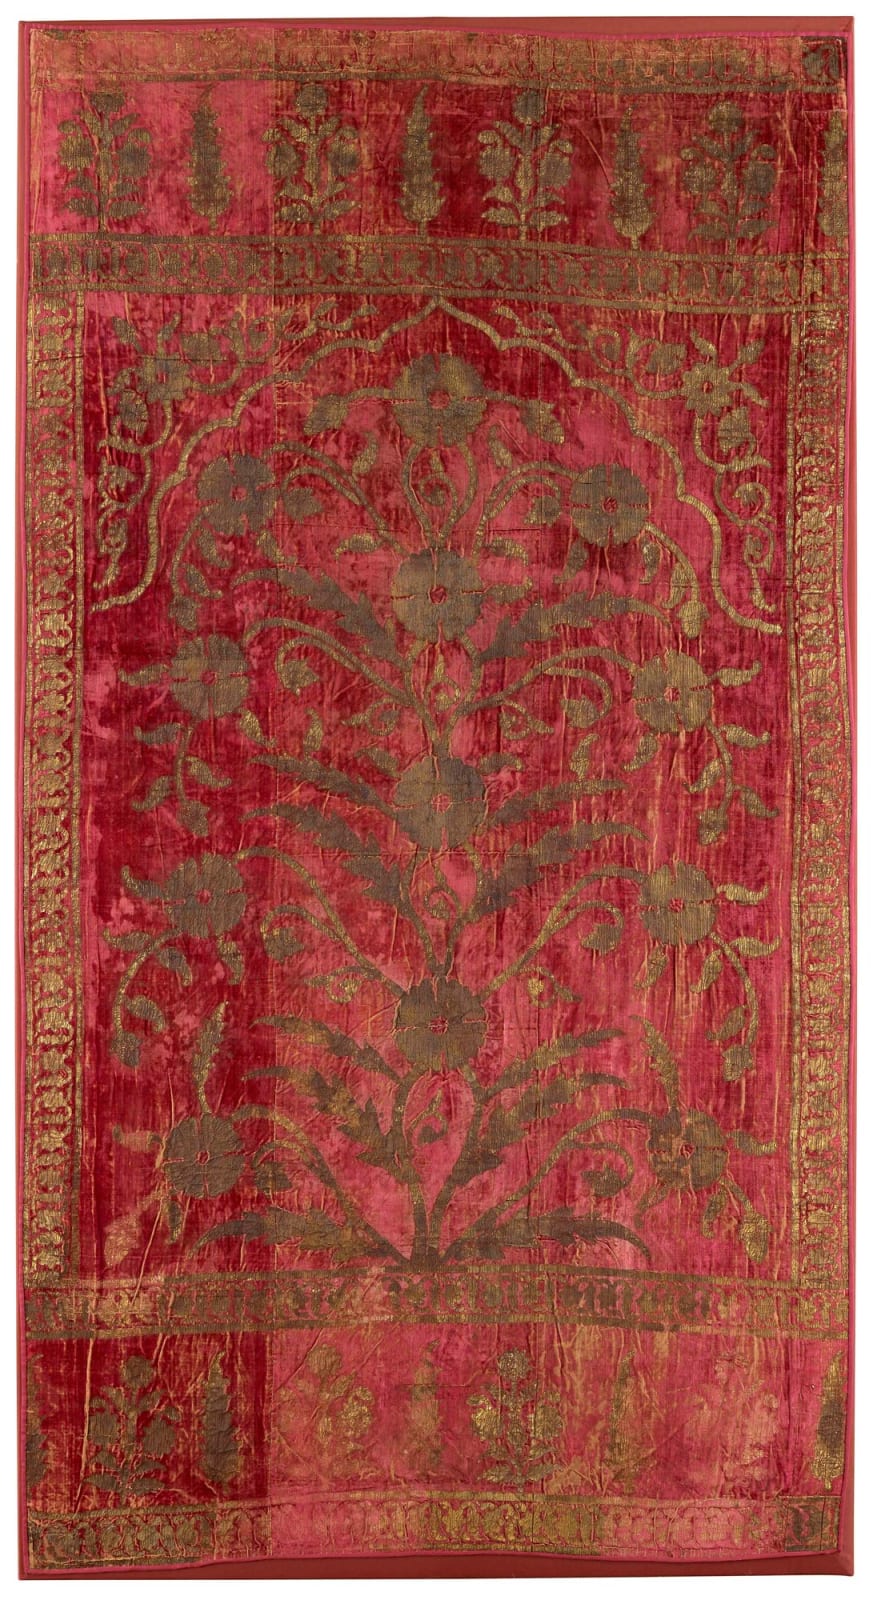 Princely Tent Panel with flowering Poppy Plant within a Niche, Mughal style from Rajasthan, probably Jaipur, late 18th-early 19th century